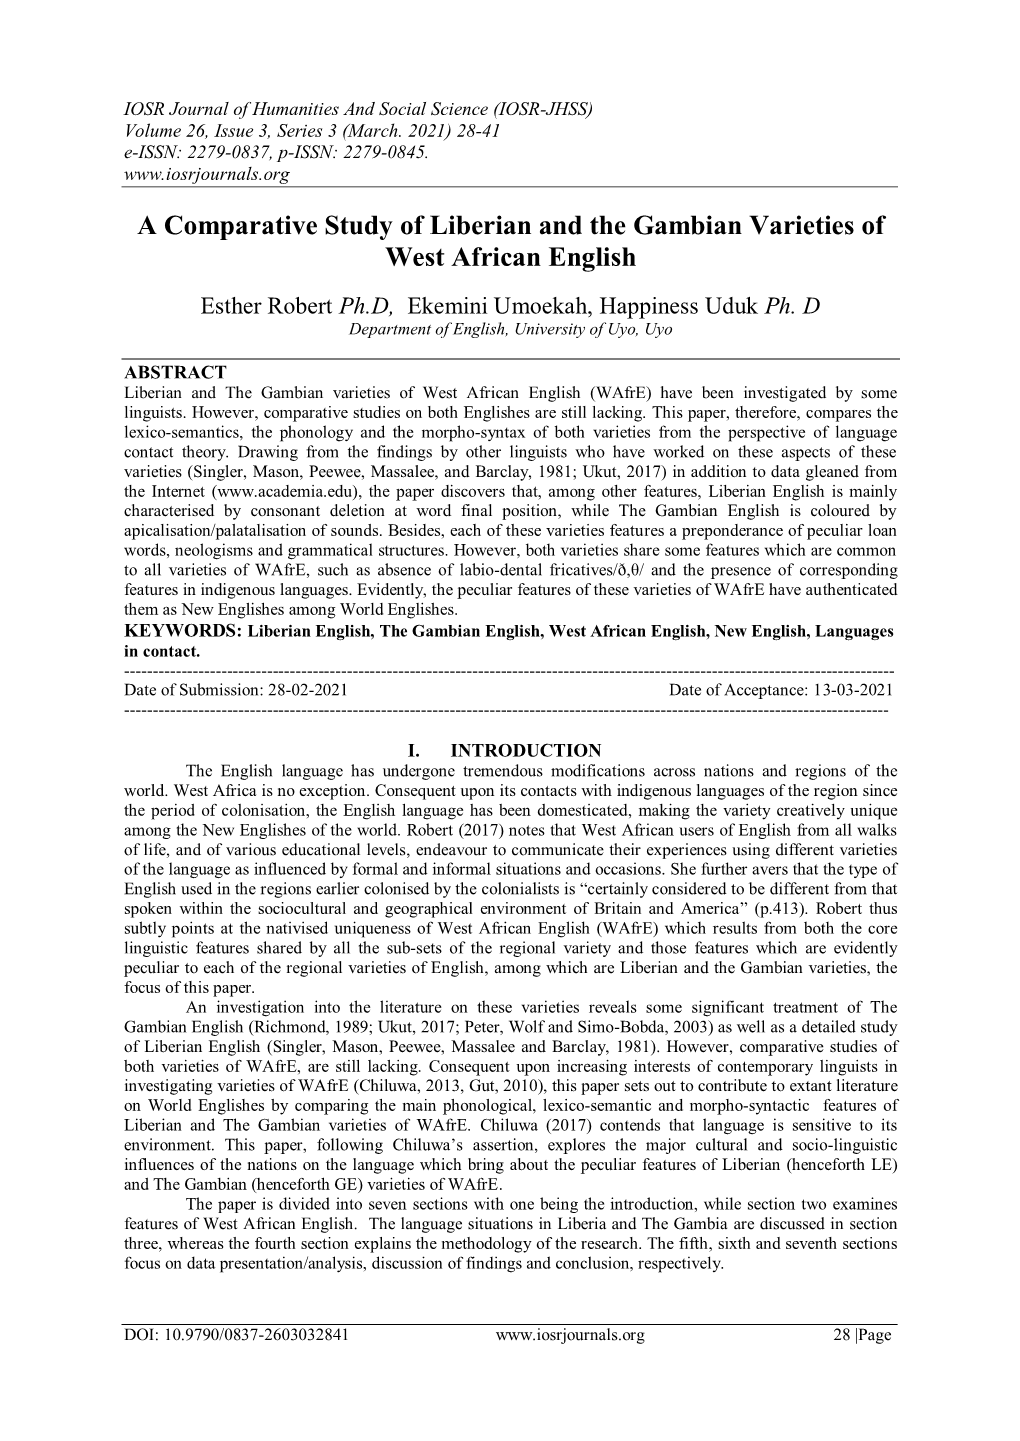 A Comparative Study of Liberian and the Gambian Varieties of West African English